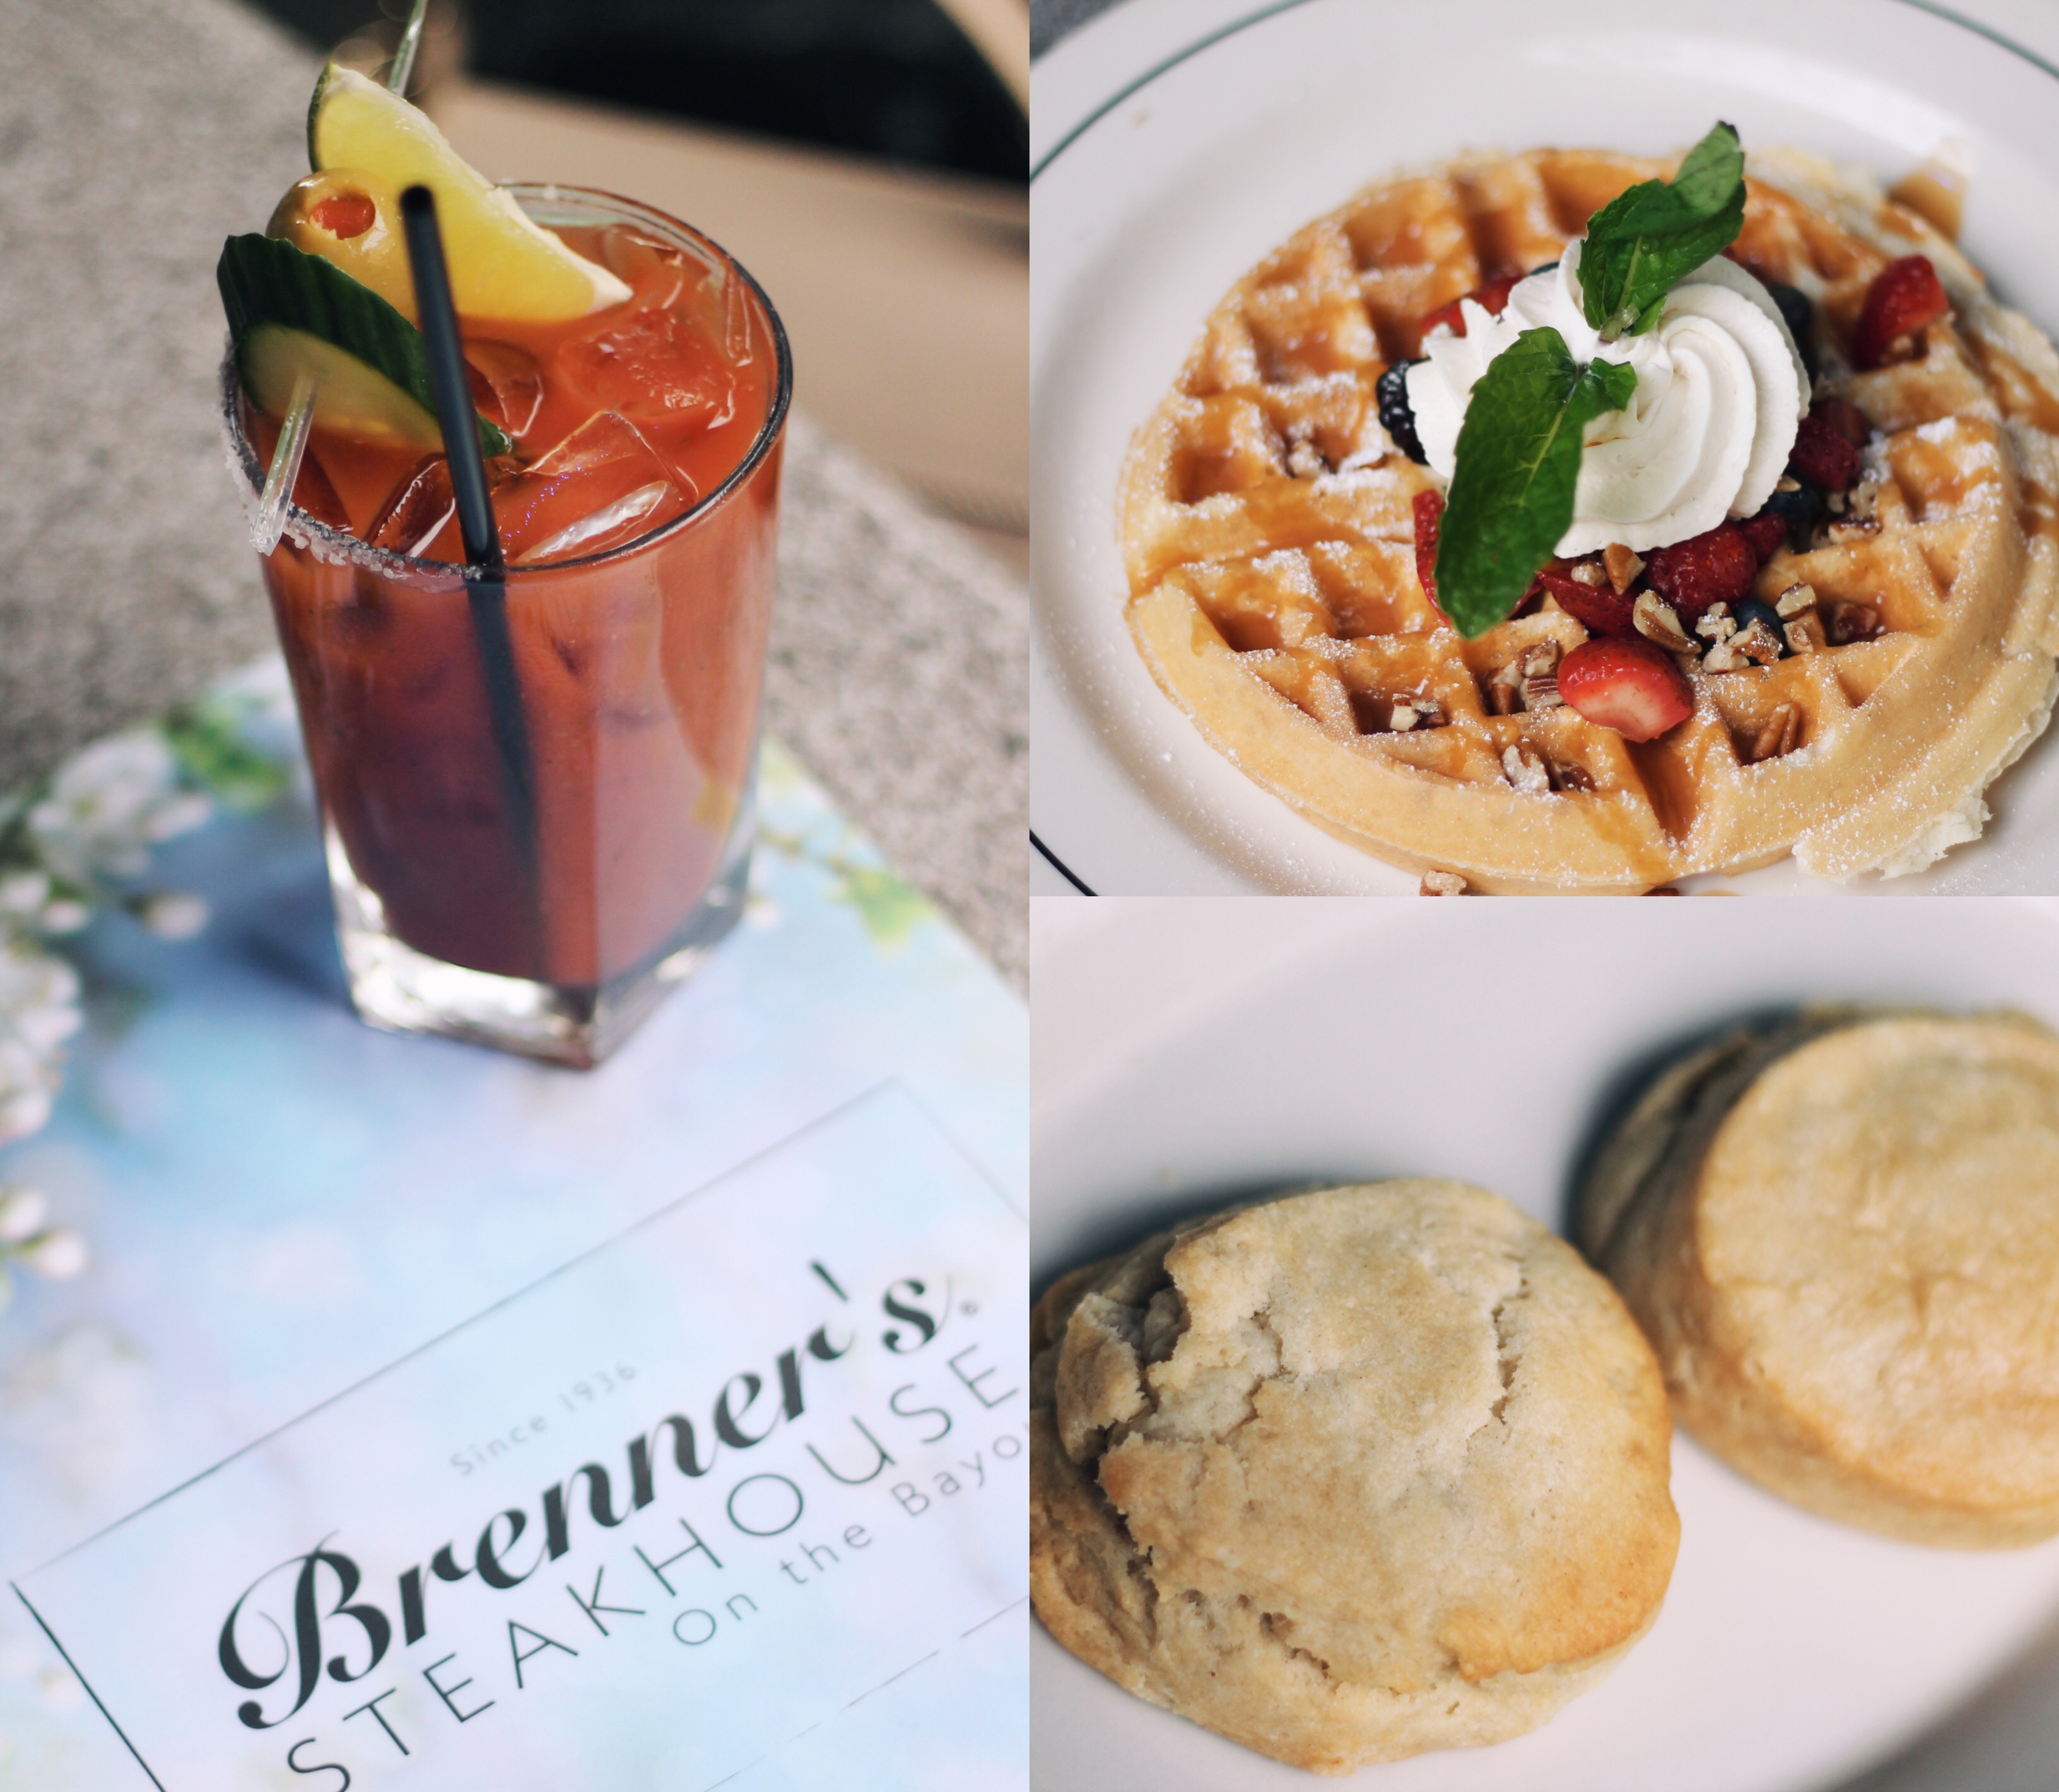 brenner's on the bayou, houston city guide, restaurants in houston where to eat, best blogger restaurants in houston, best brunch in houston, best biscuits in houston, most beautiful patio restaurants in houston, restaurants with a patio for happy hour